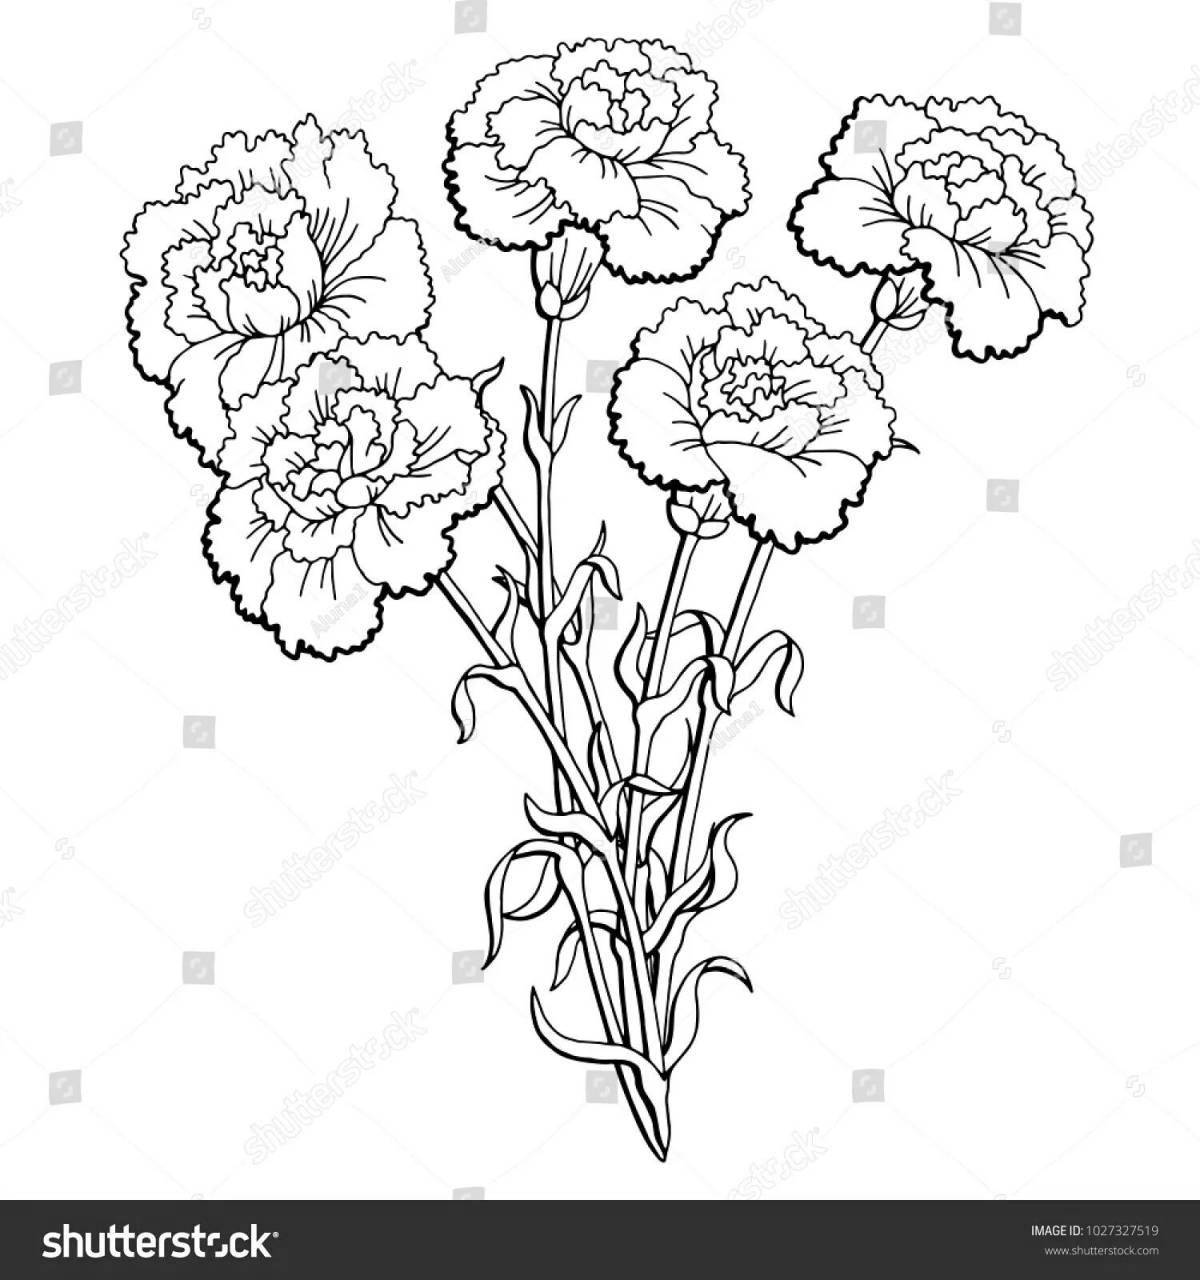 Coloring book with amazing carnation pattern